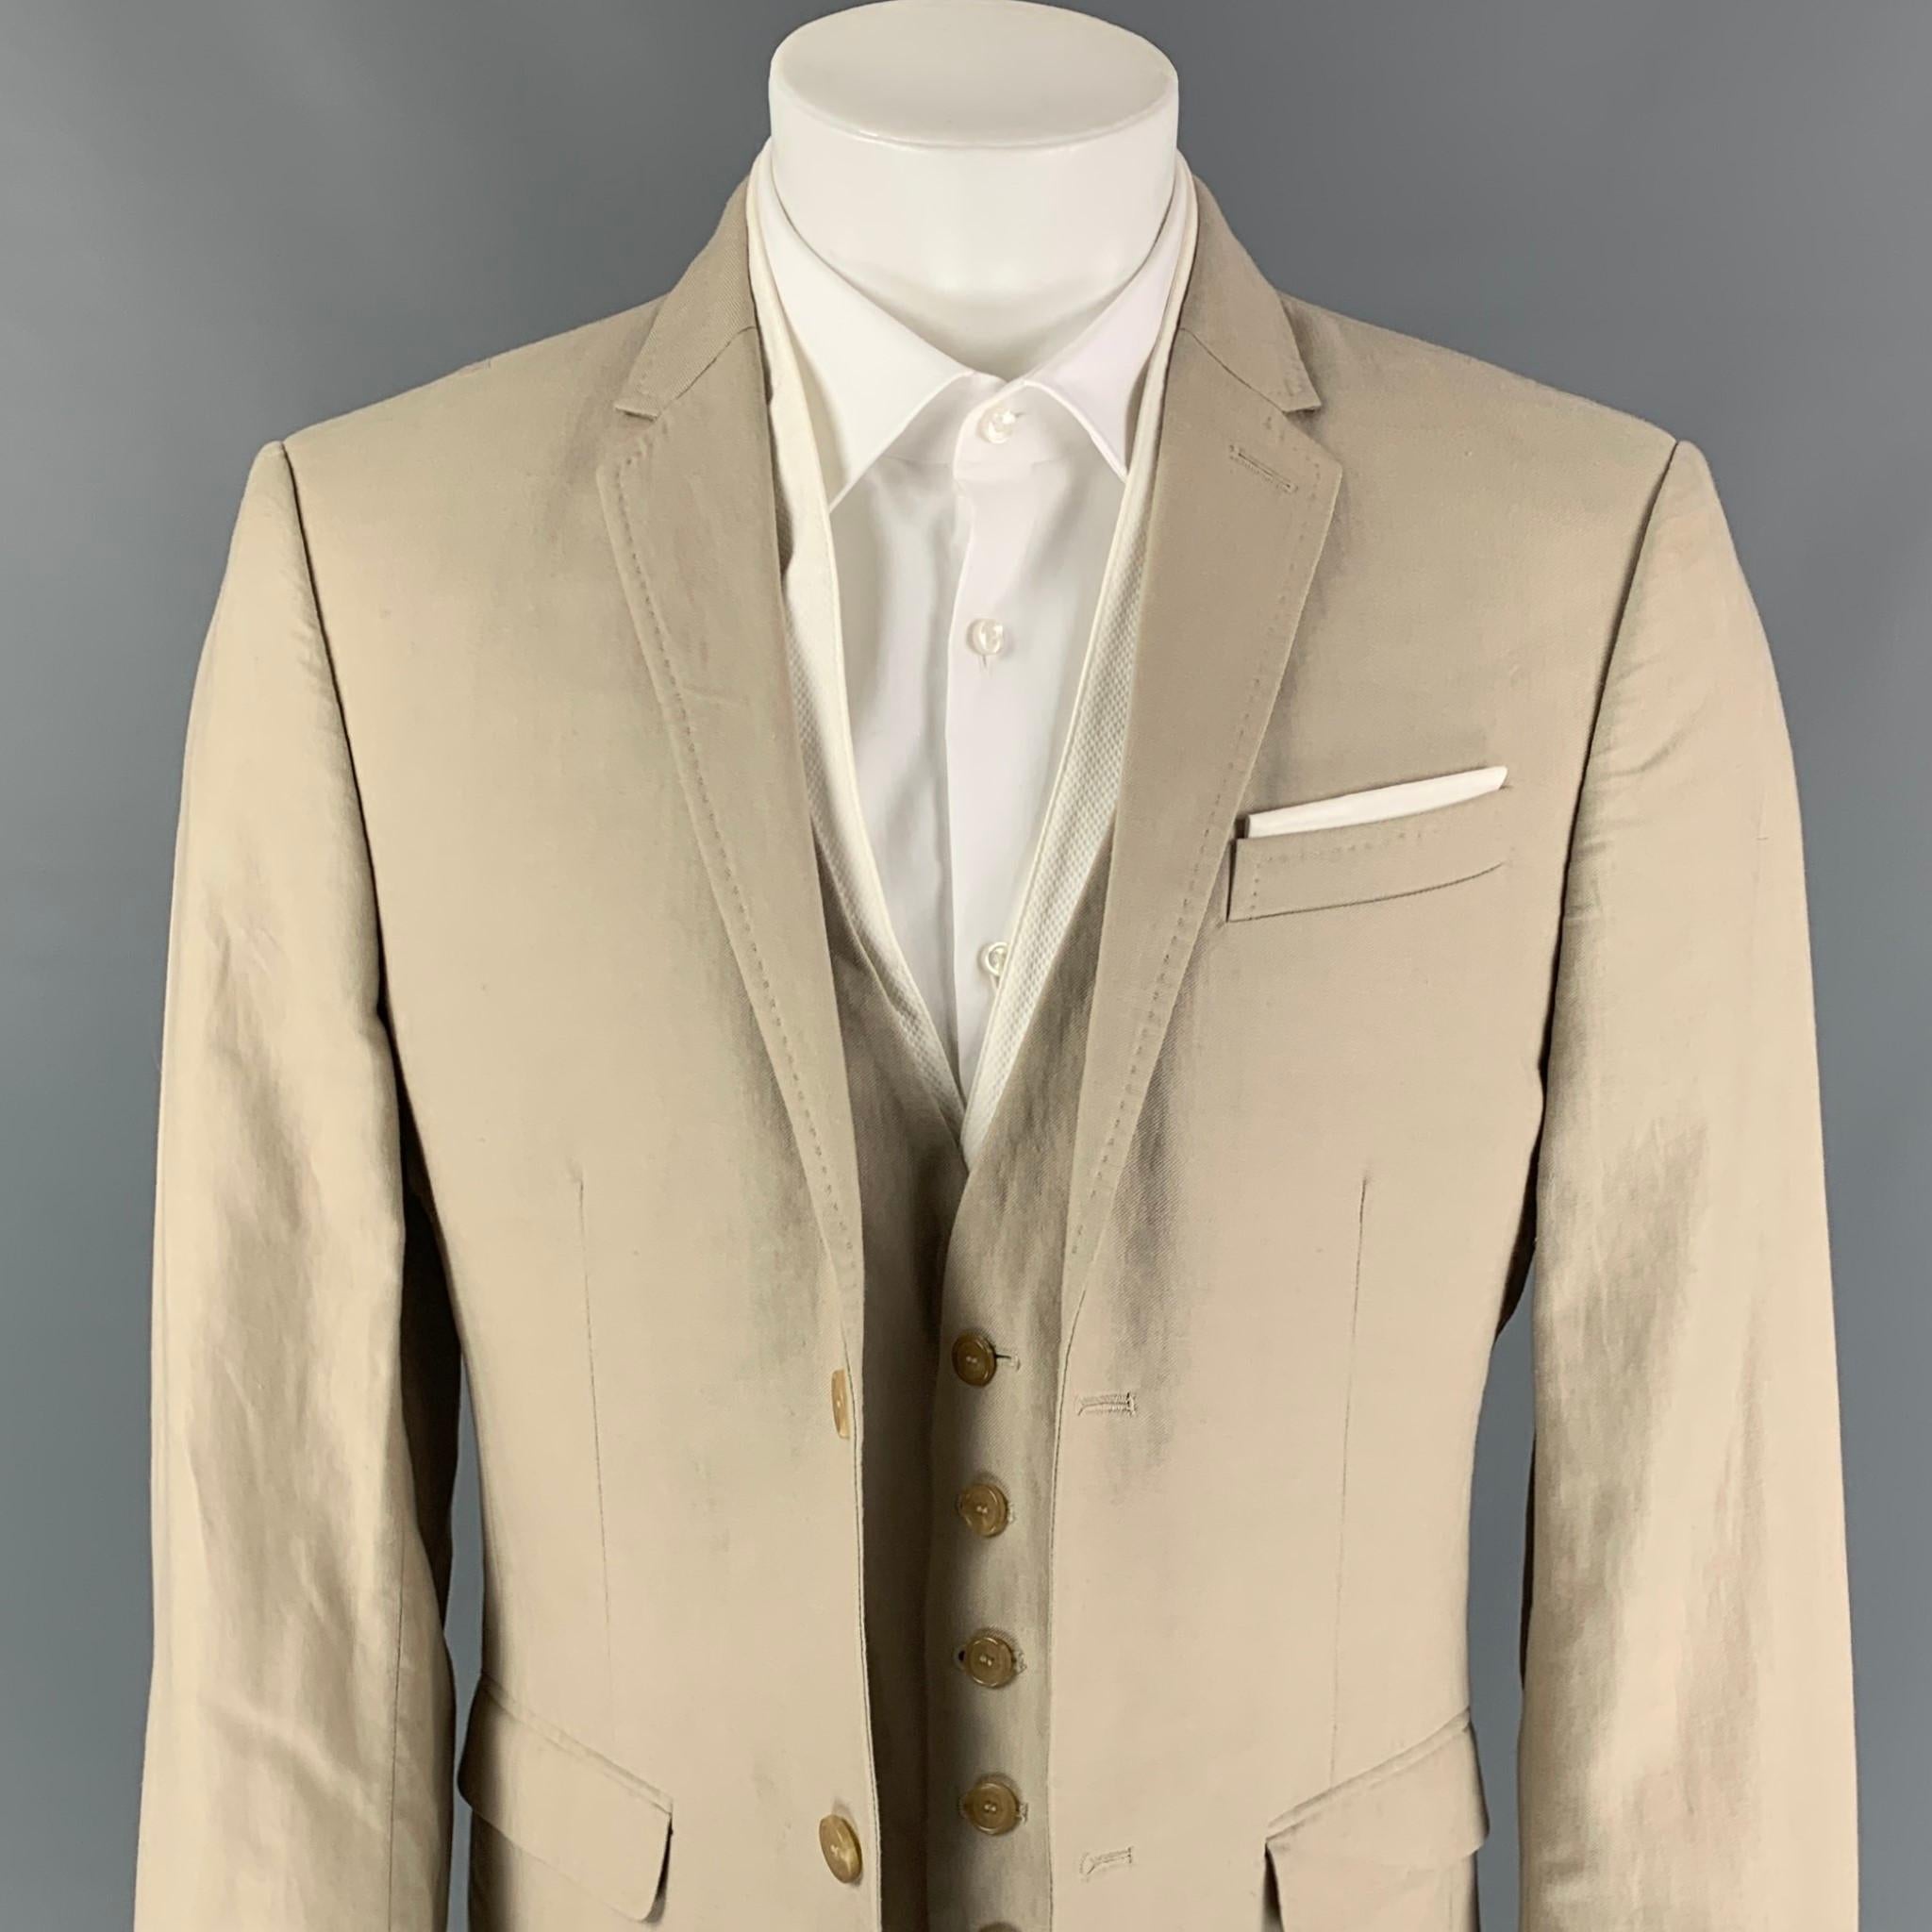 NEIL BARRETT sport coat comes in a khaki & white cotton / linen featuring a simulated vest layer, notch lapel, flap pockets, and a buttoned closure. Made in Italy. 

Very Good Pre-Owned Condition.
Marked: 50

Measurements:

Shoulder: 18 in.
Chest: